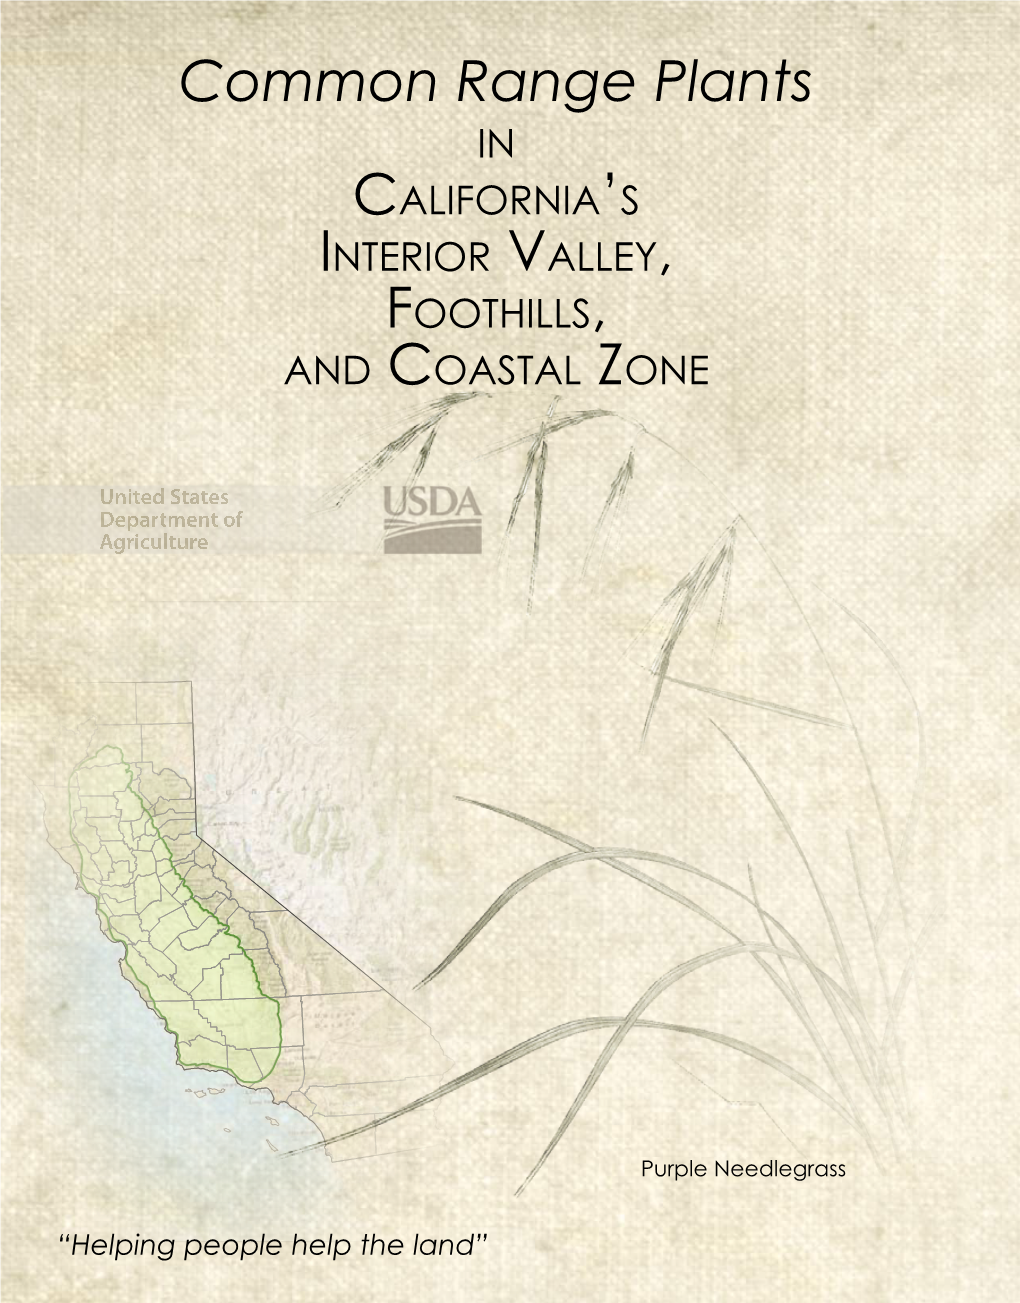 Common Range Plants in California’S Interior Valley, Foothills, and Coastal Zone